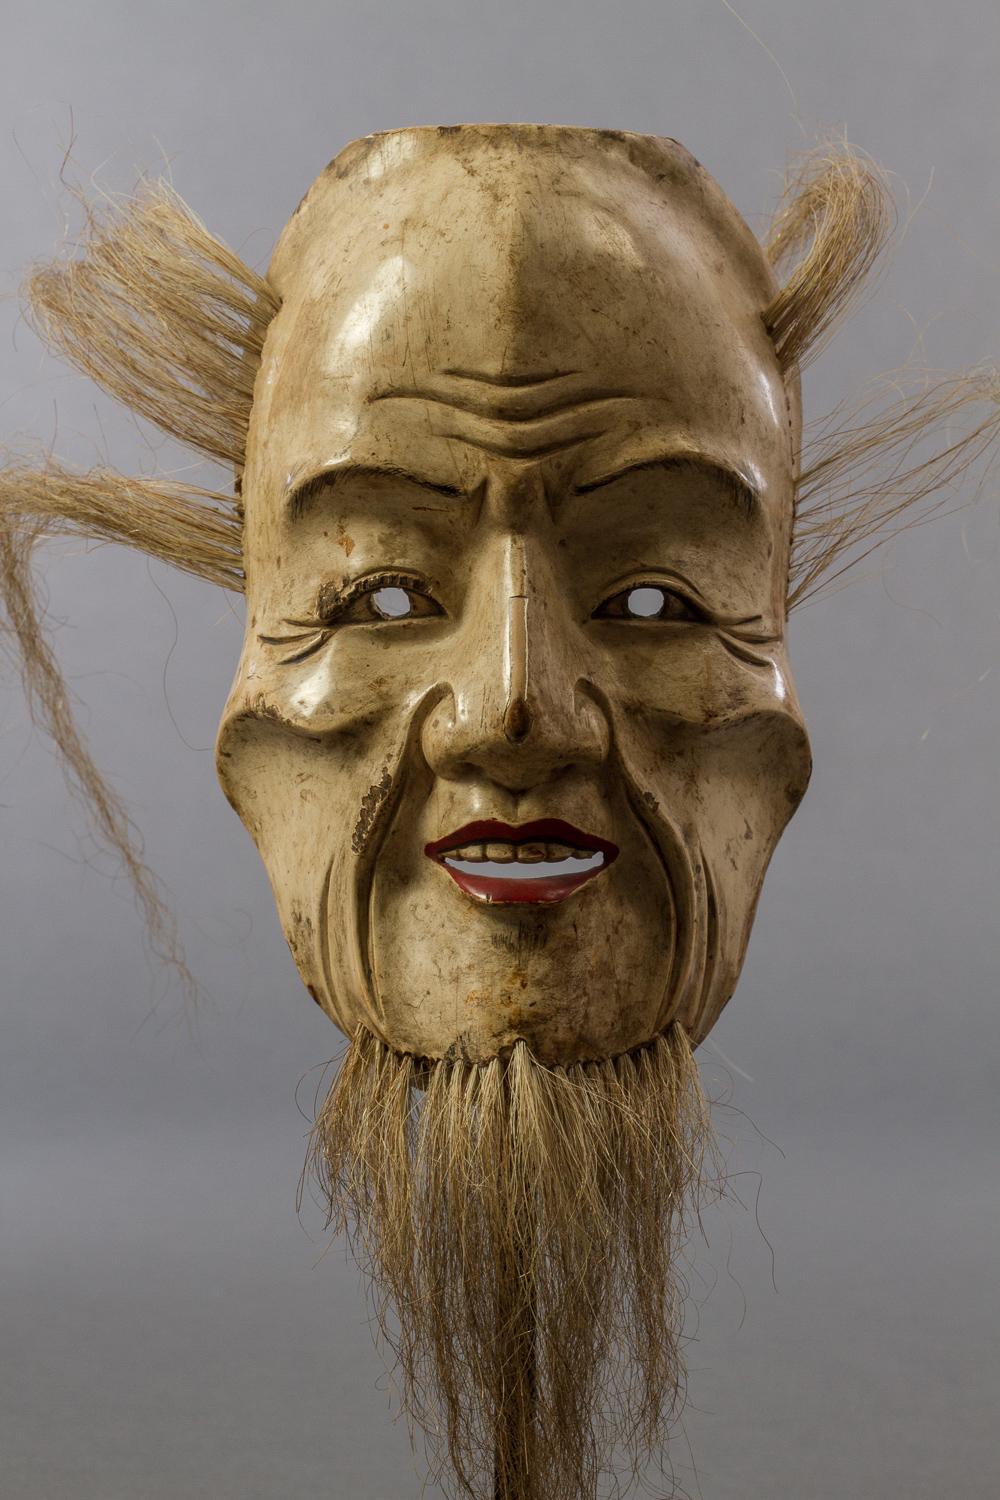 Early 19th century Japanese wood noh mask, This mask comes in its original kiri wood storage box, which is signed and dated: Koran, 1811 (Edo period). The box also describes the mask as part of the honorable collection of Gokoku'in (a shrine